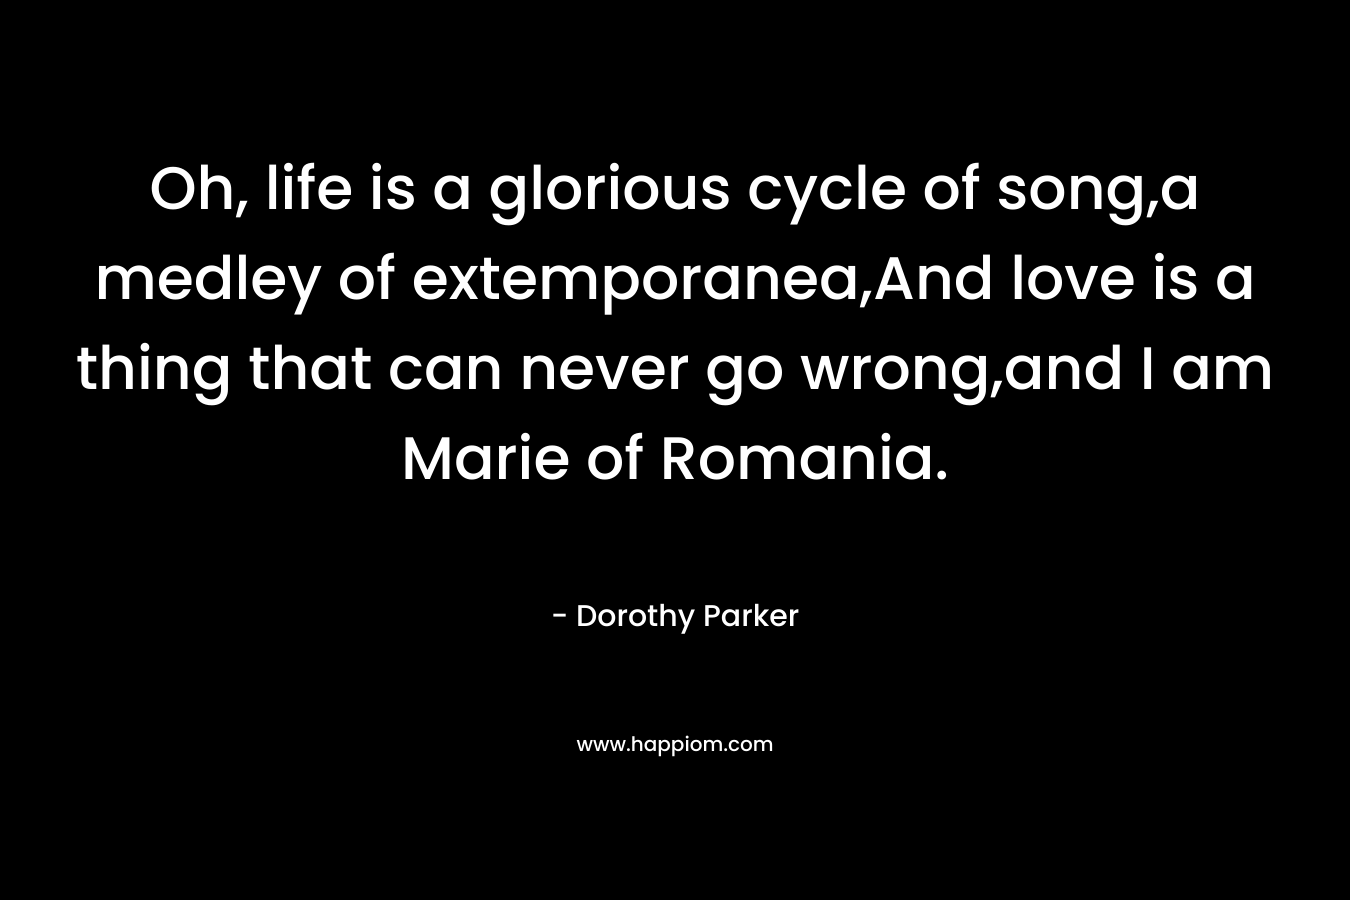 Oh, life is a glorious cycle of song,a medley of extemporanea,And love is a thing that can never go wrong,and I am Marie of Romania. – Dorothy Parker